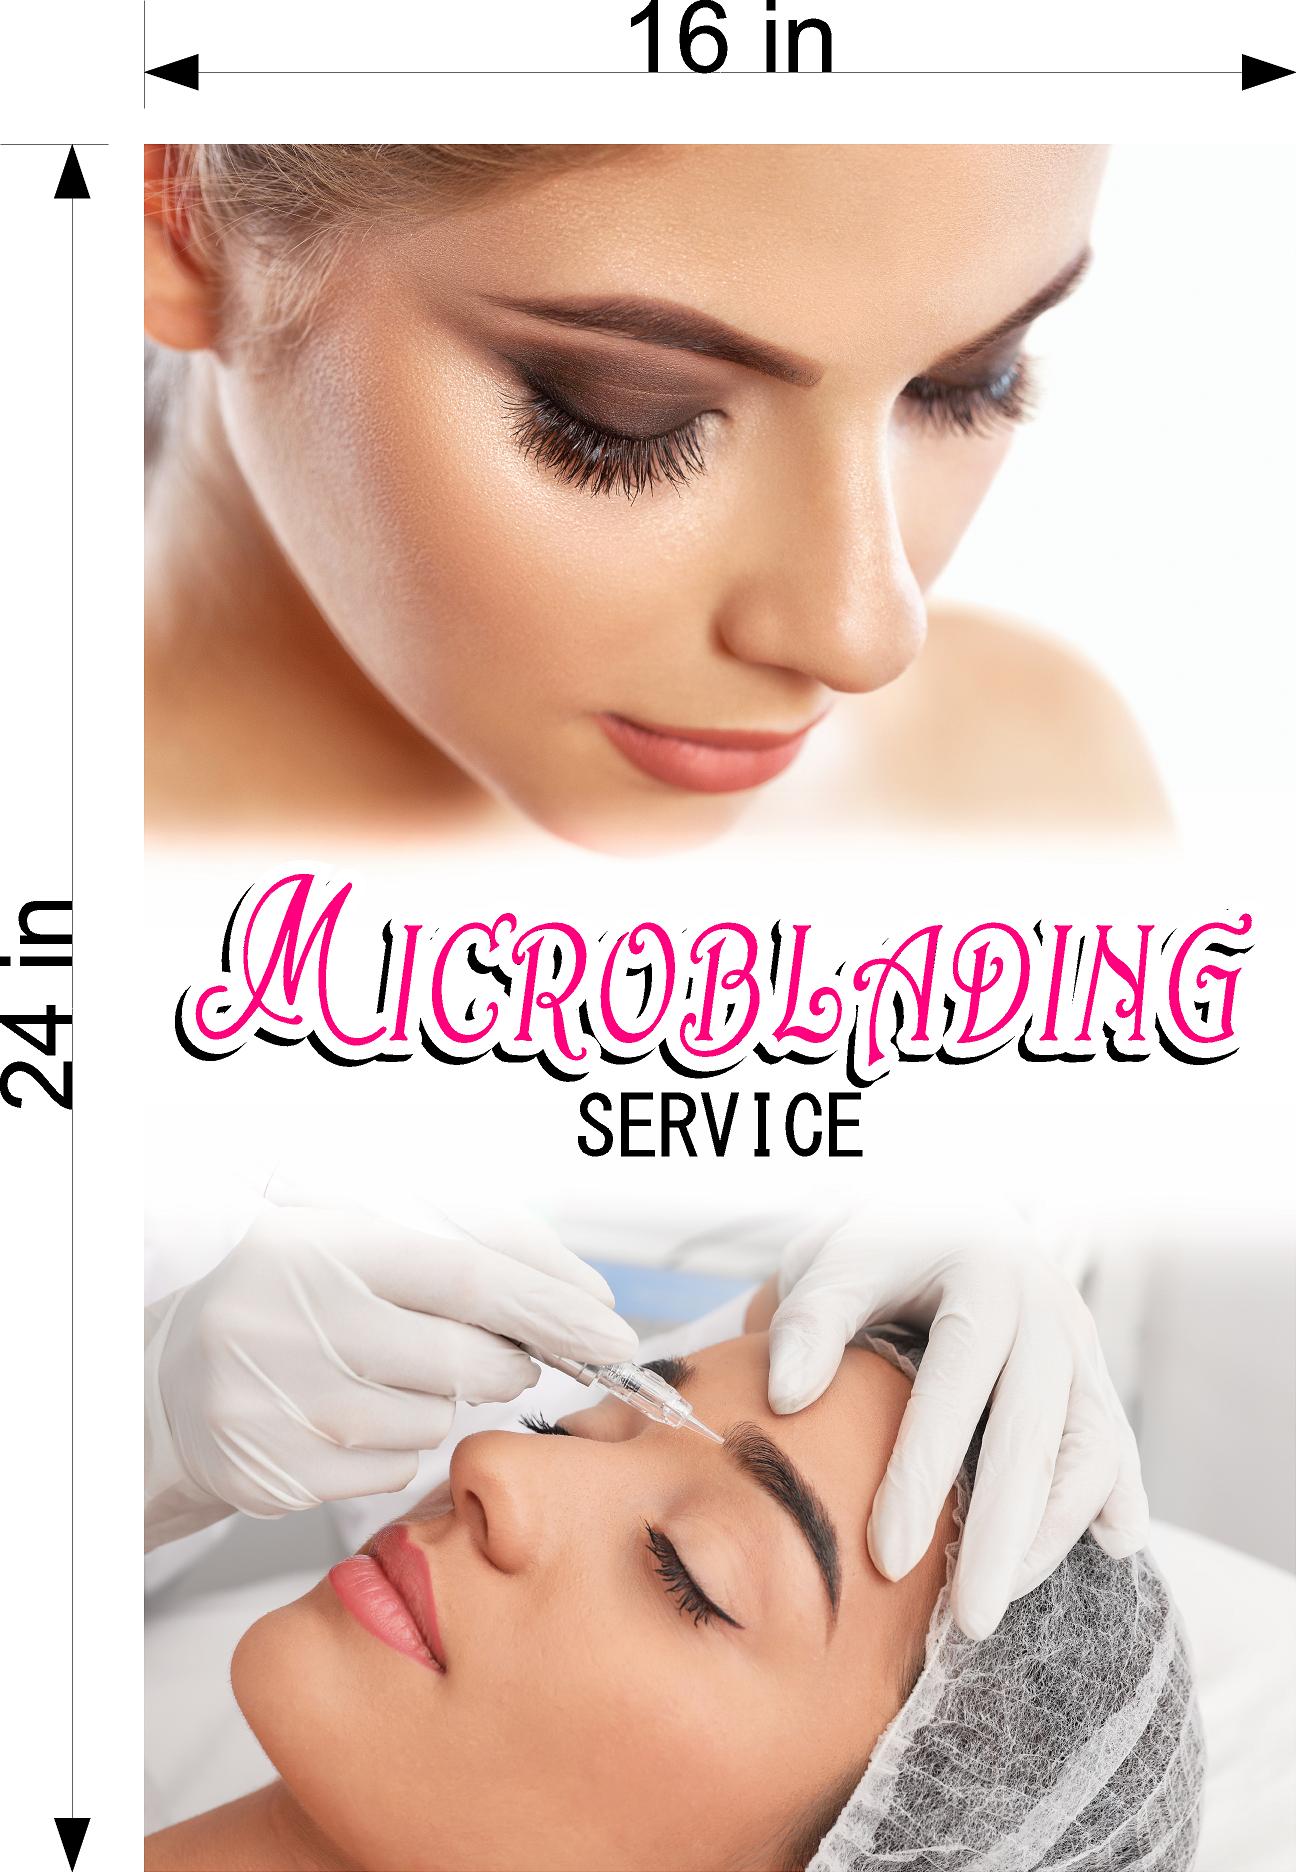 Microblading 13 Perforated Mesh One Way Vision See-Through Window Vinyl Salon Services Permanent Makeup Tattoo Vertical